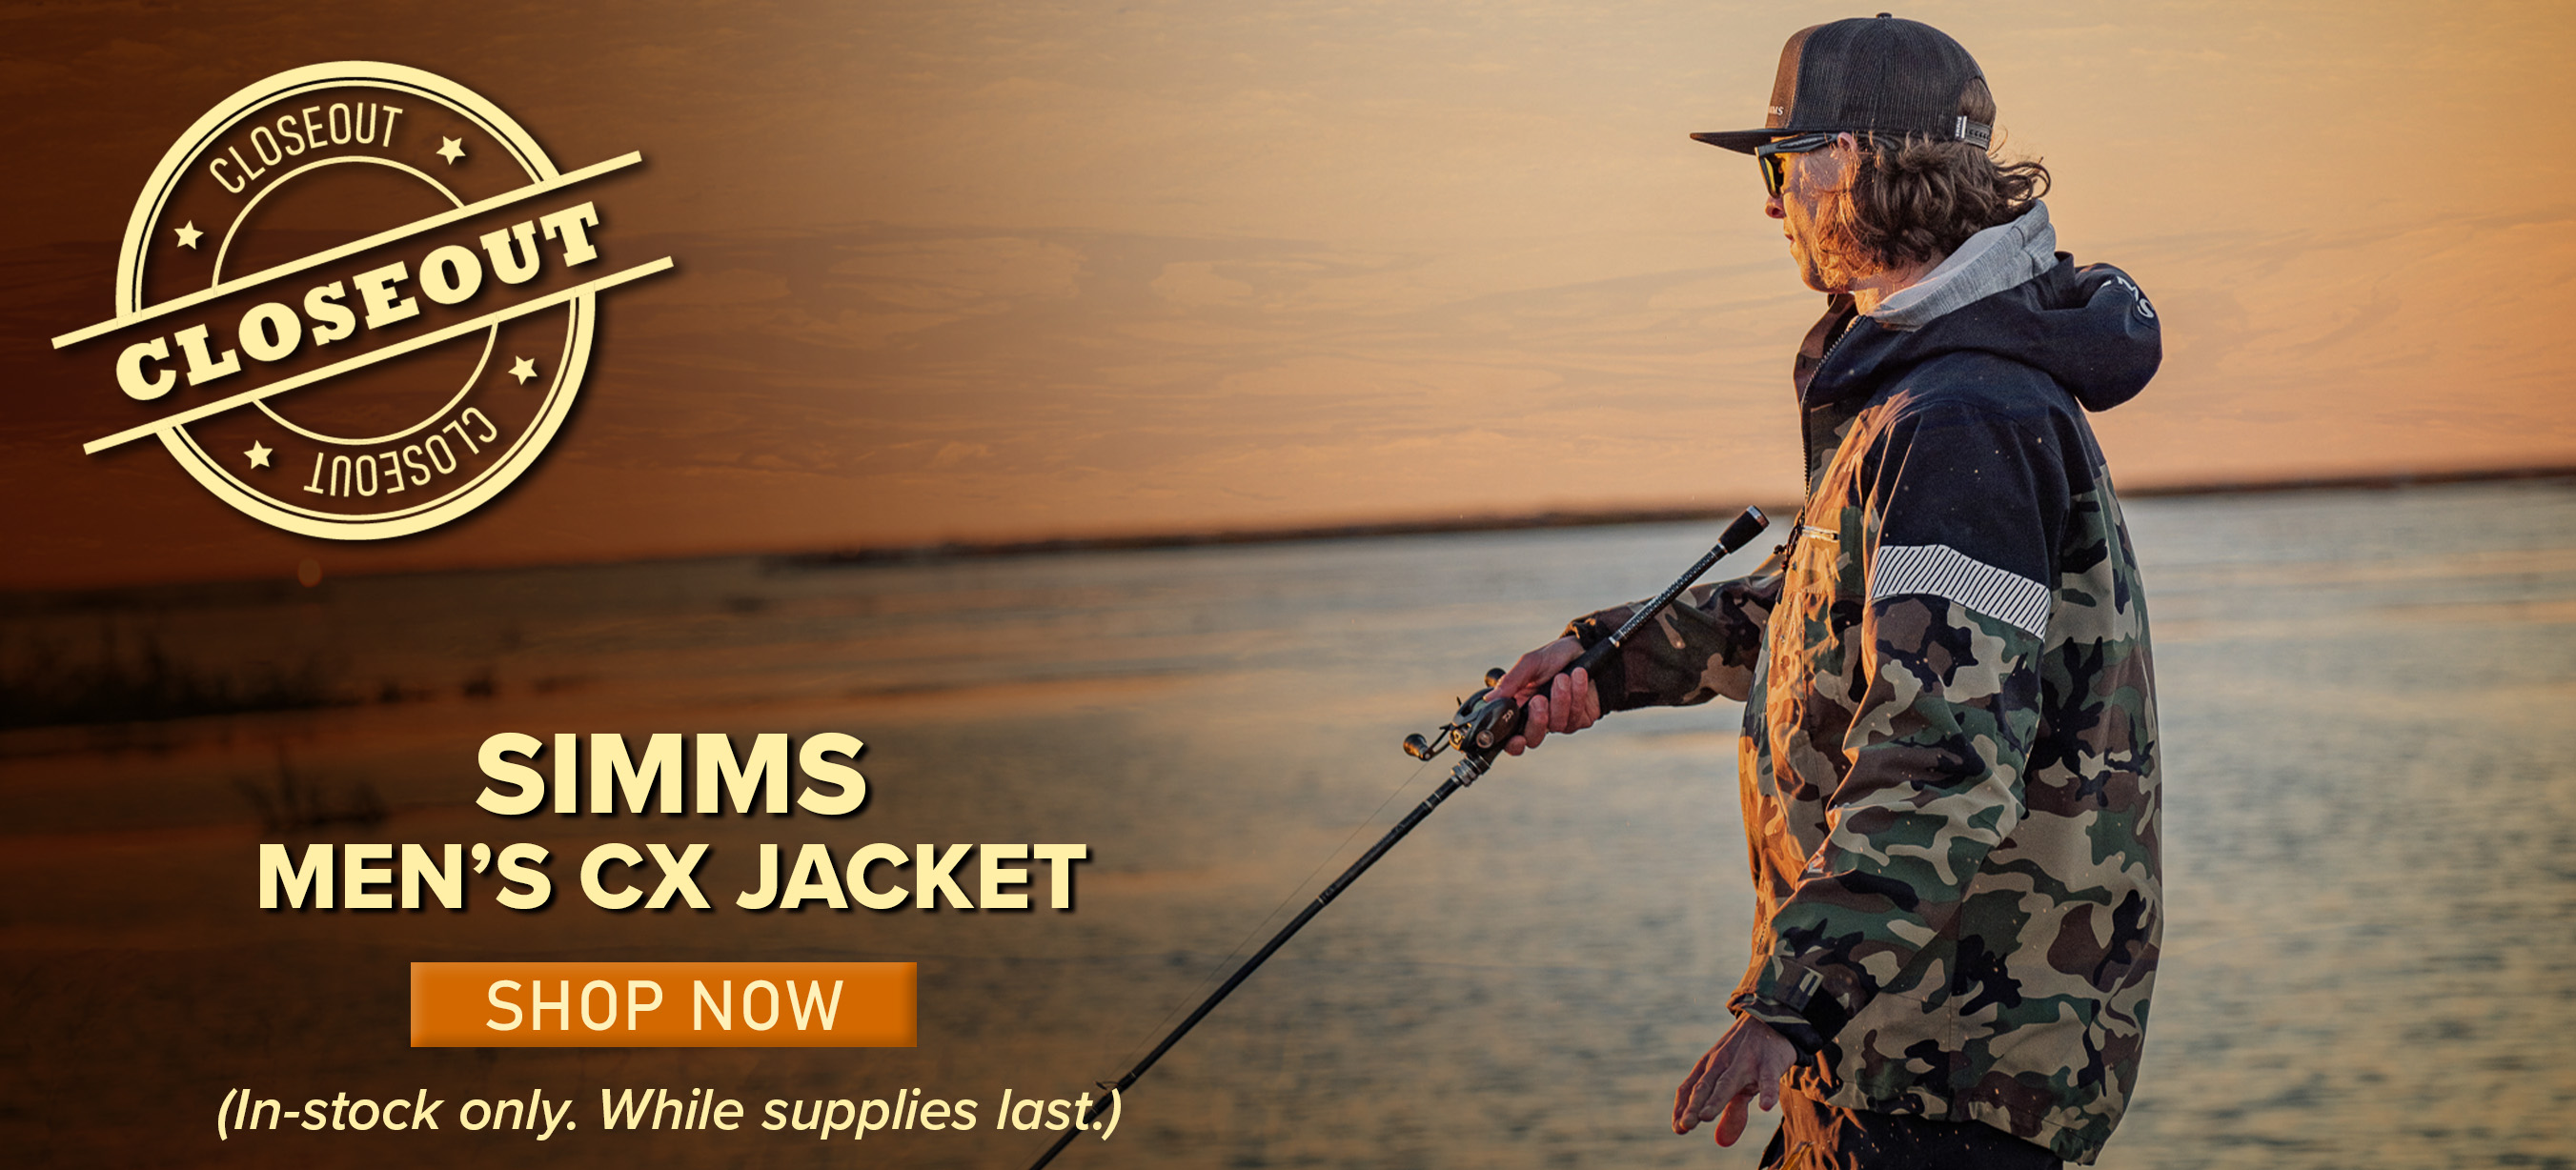 Closeout Simms Men's CX Jacket Shop Now (In-stock only. While supplies last.)